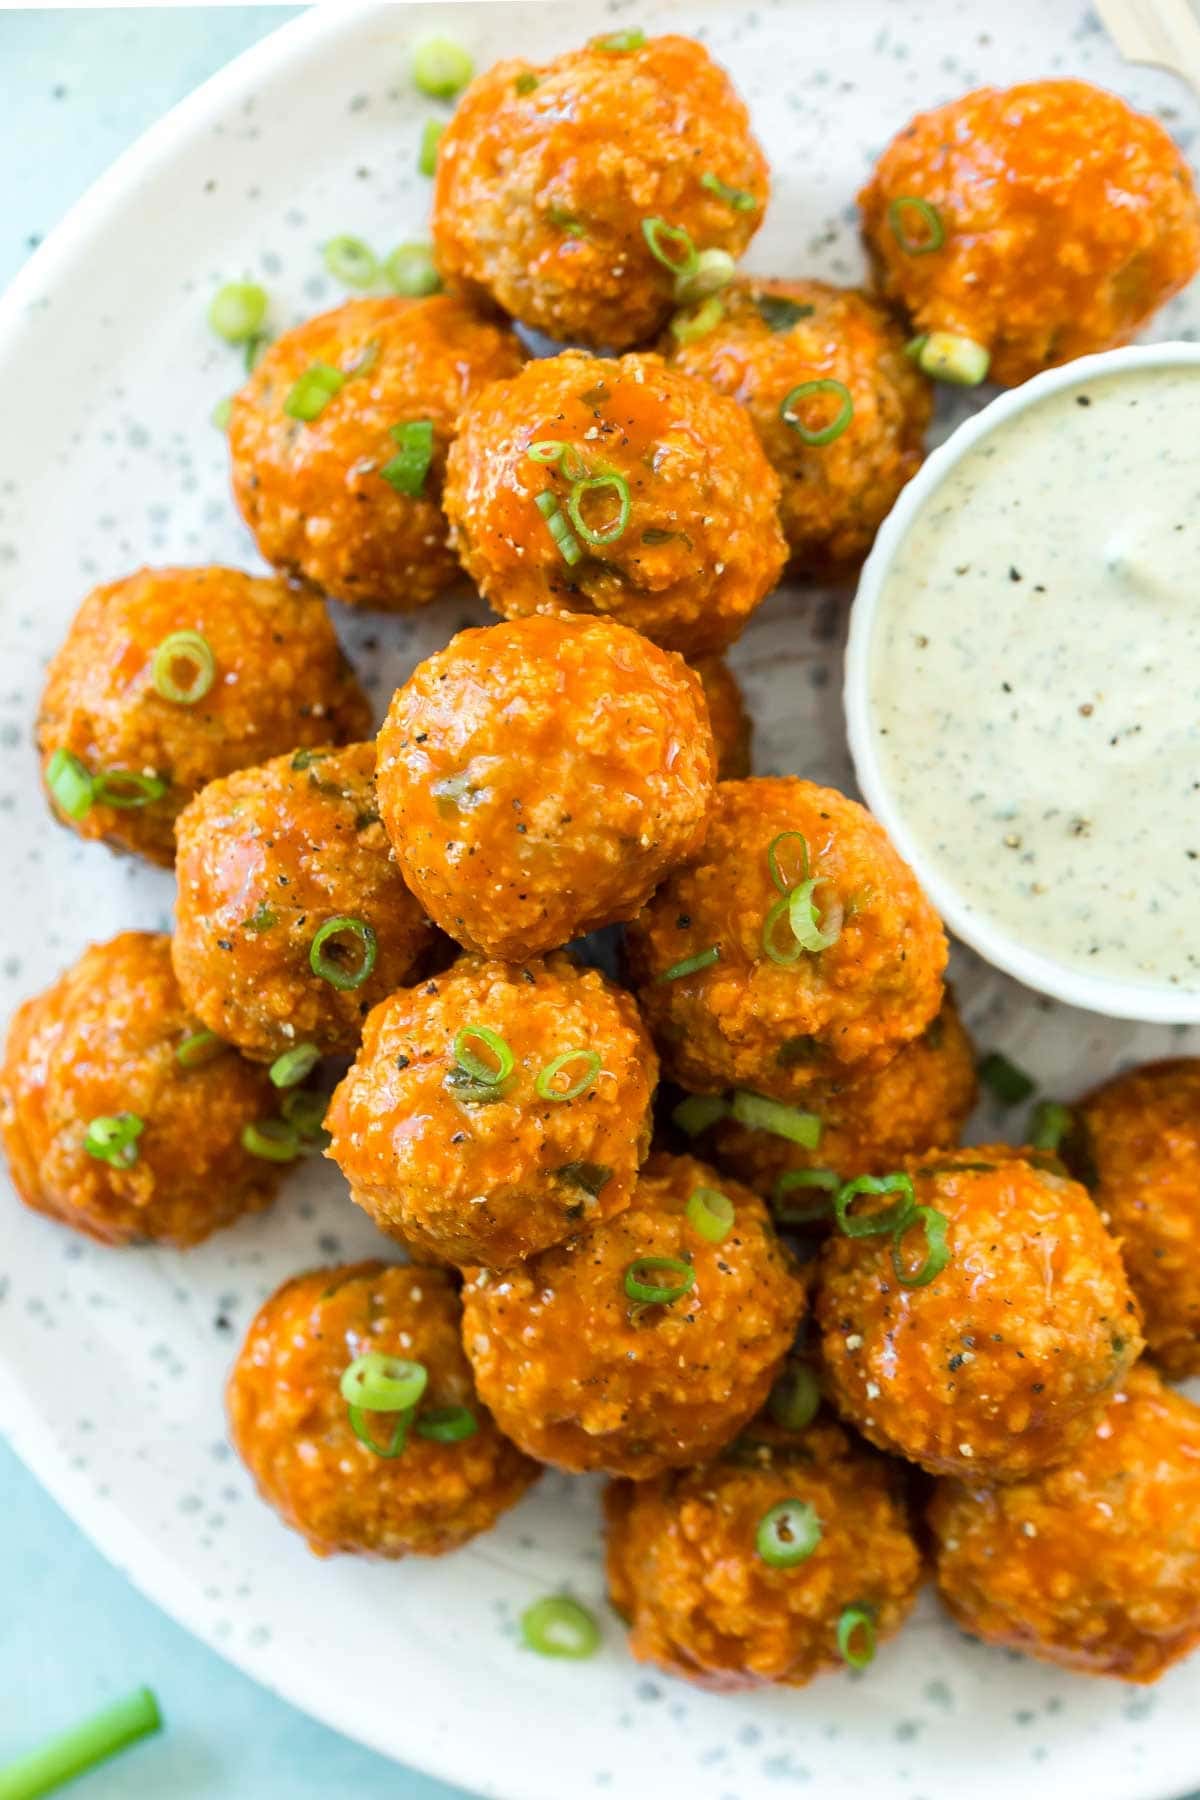 Meatballs coated with buffalo sauce served with creamy dip and garnished with chopped parsley leaves.